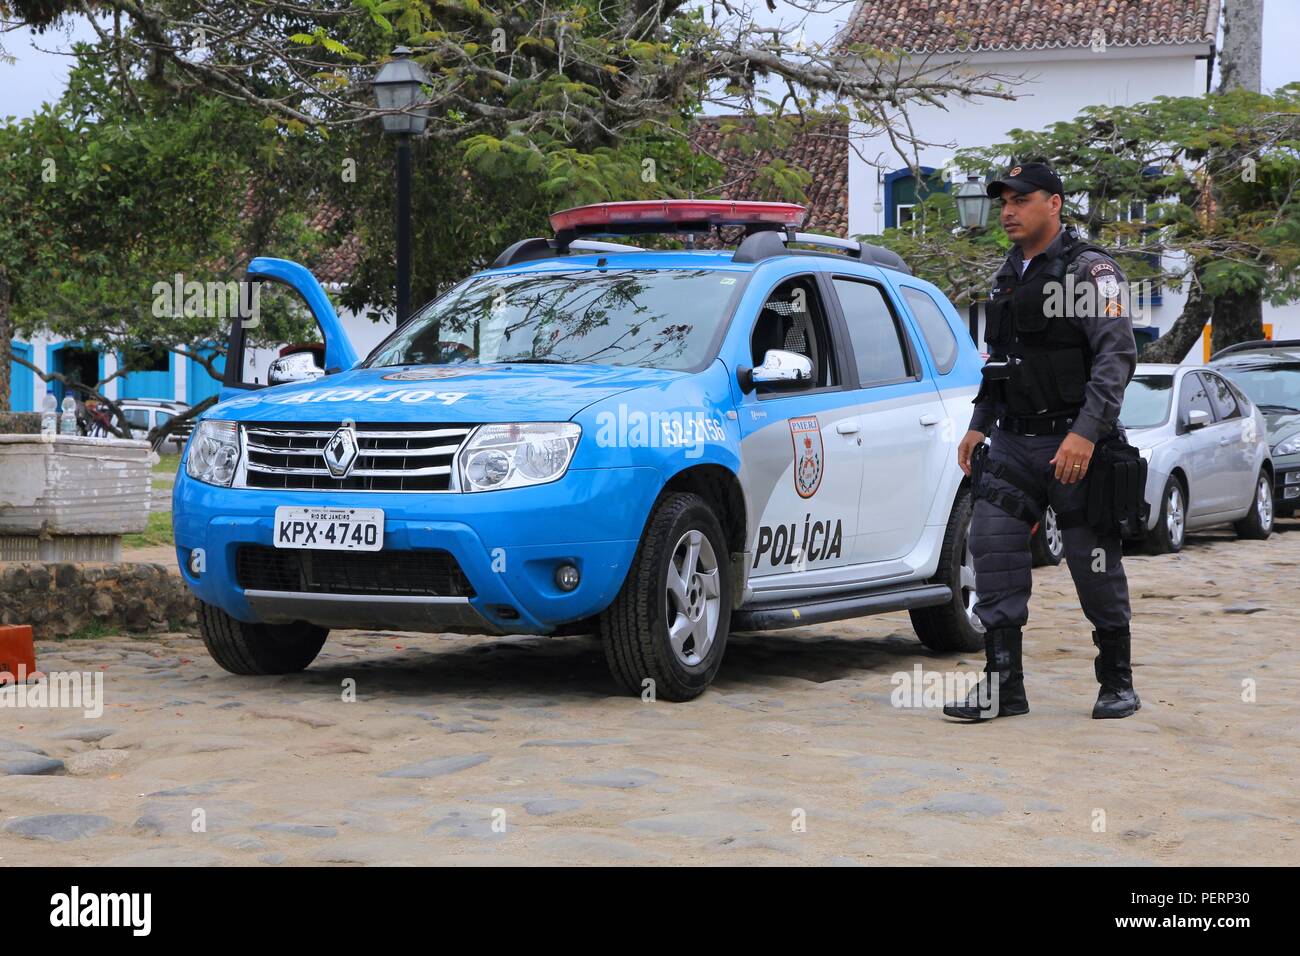 PARATY, BRAZIL - OCTOBER 14, 2014: Police officer walks next to Renault Duster police car in Paraty (state of Rio de Janeiro). PMERJ state police empl Stock Photo